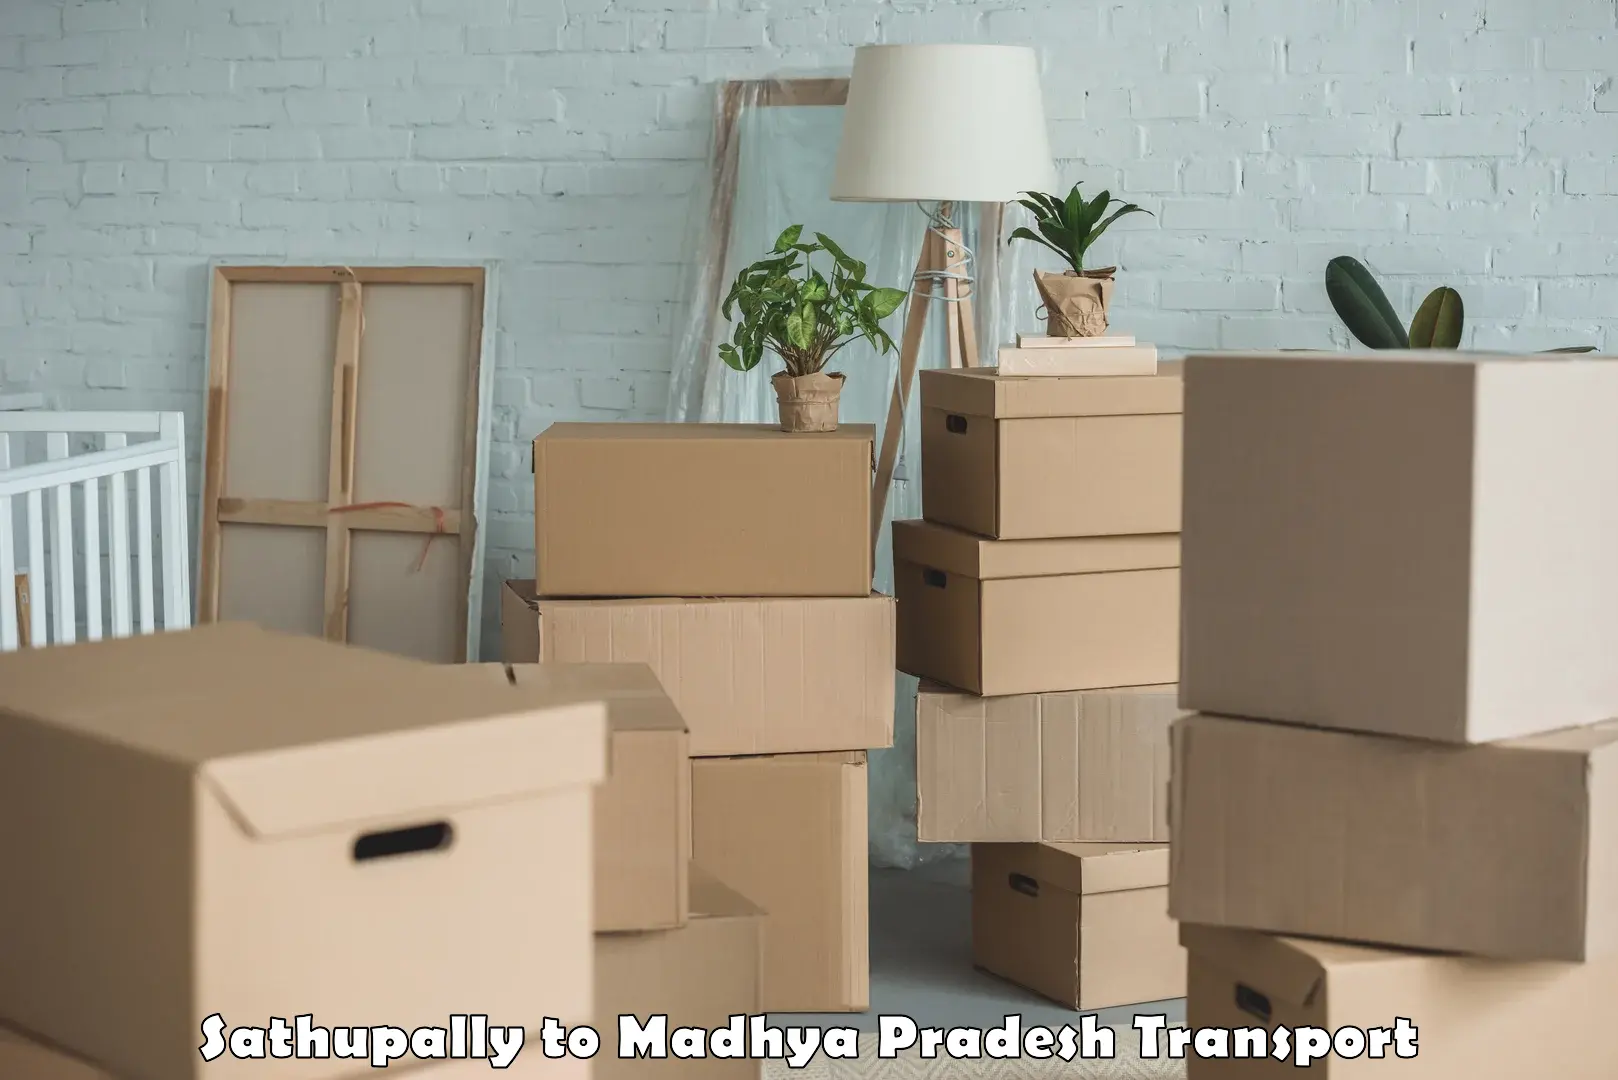 Furniture transport service in Sathupally to Sheopur